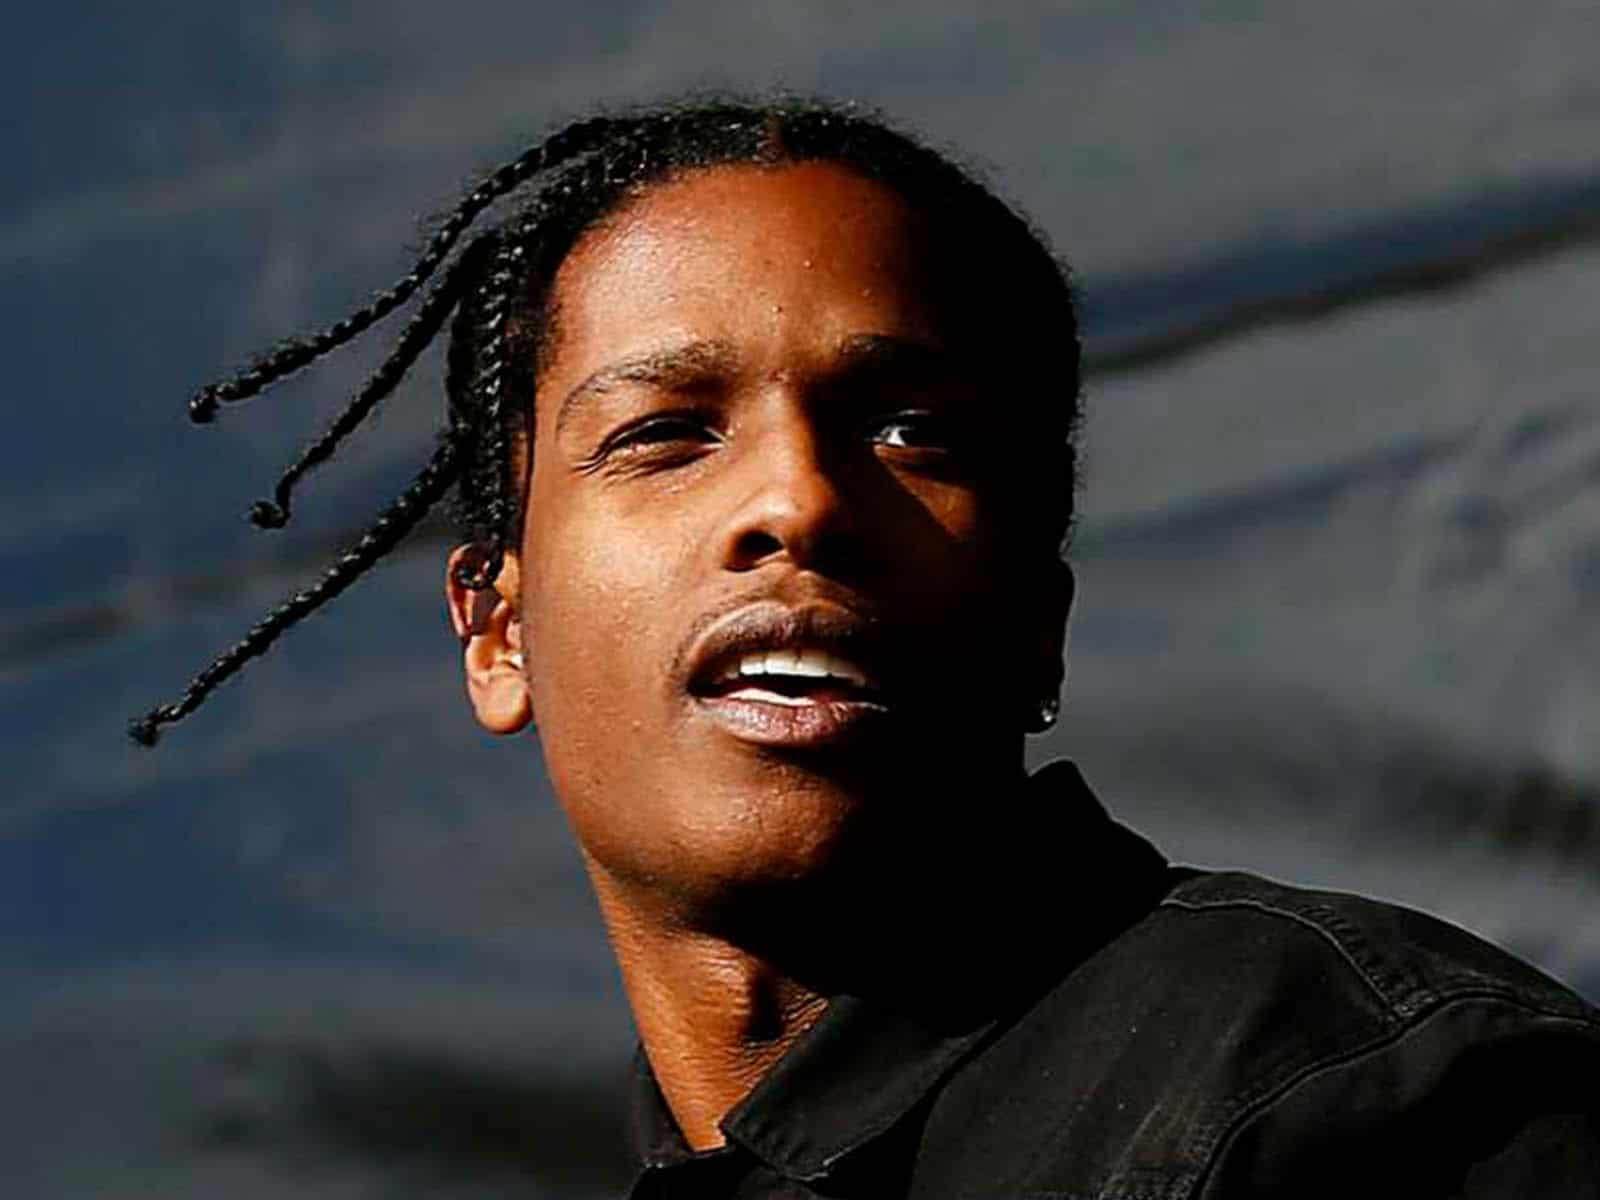 All the details of A$AP Rocky’s arrest in connection with a shooting